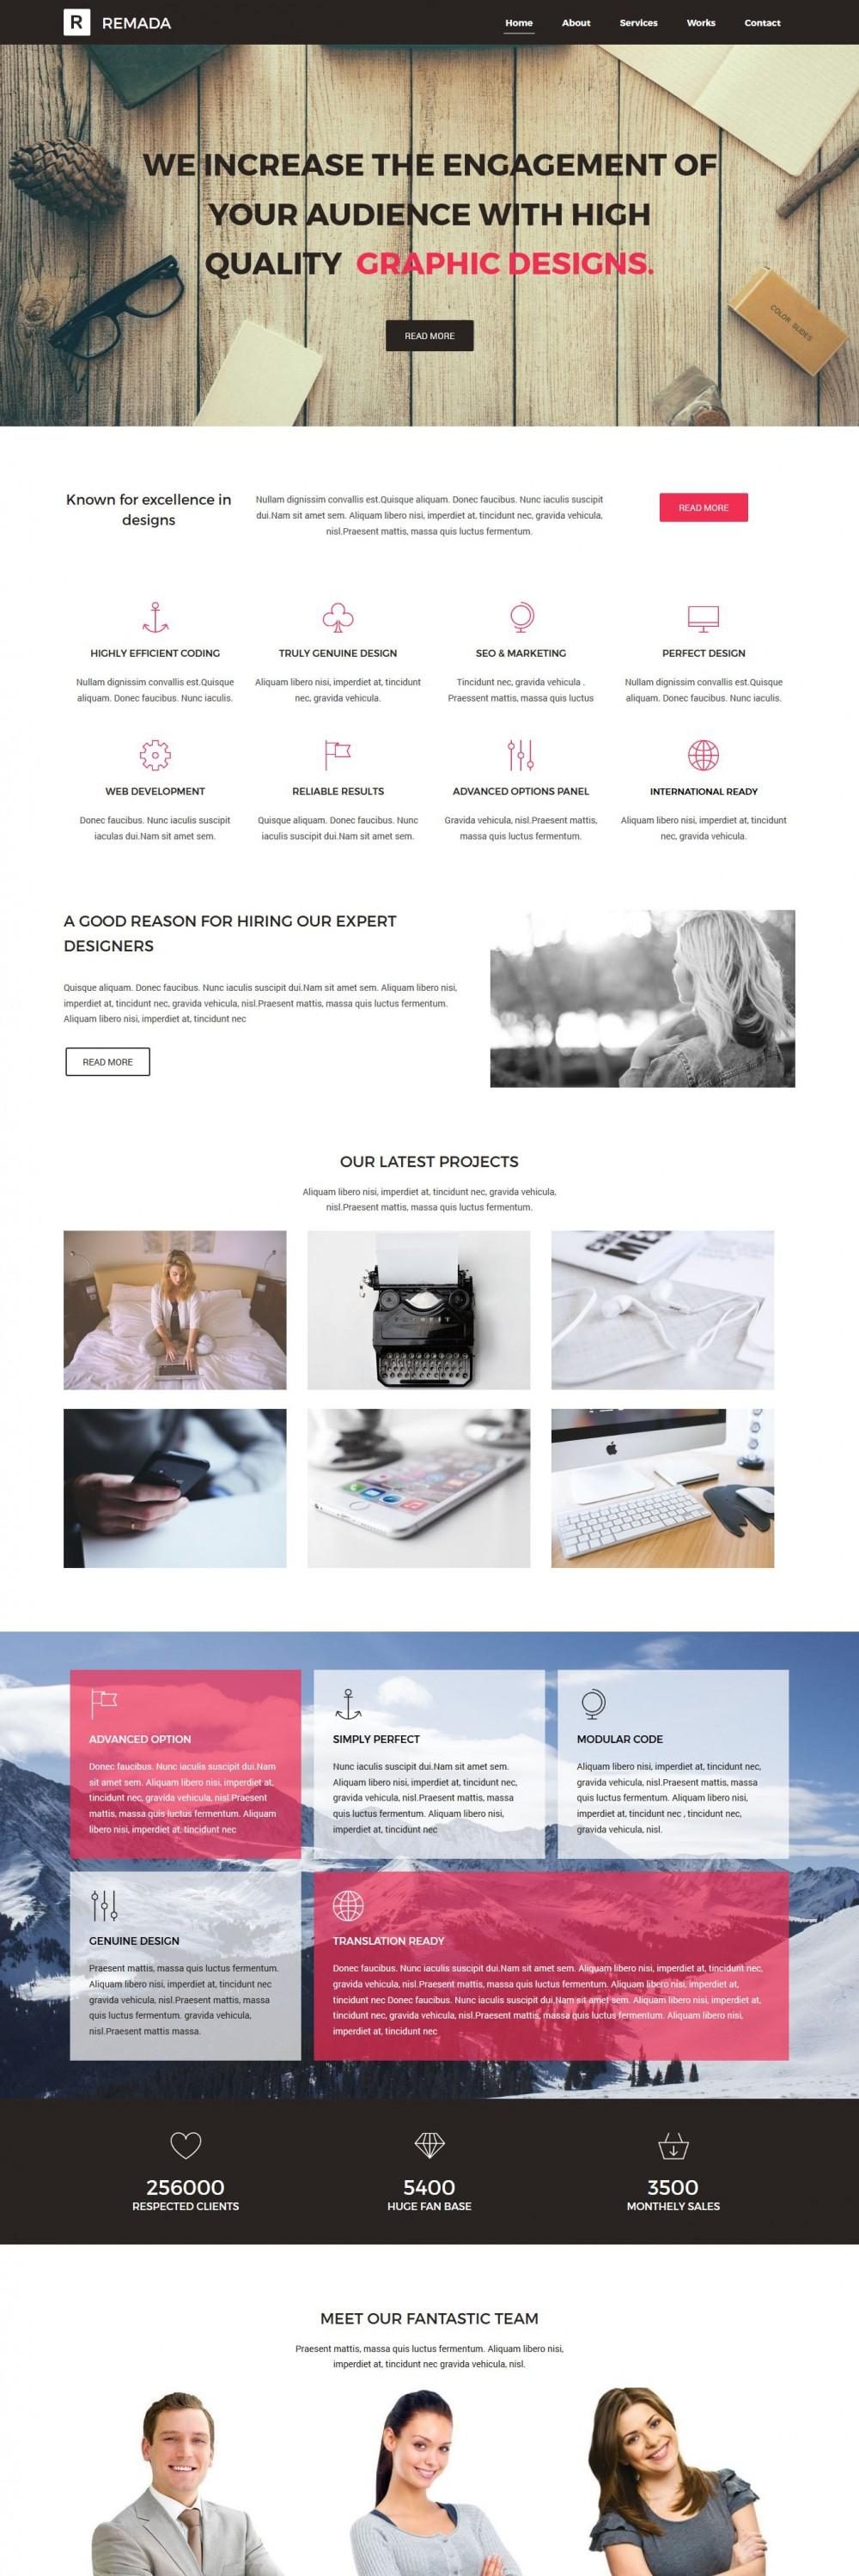 Remada - WordPress Theme For Graphic And Web Design Agency